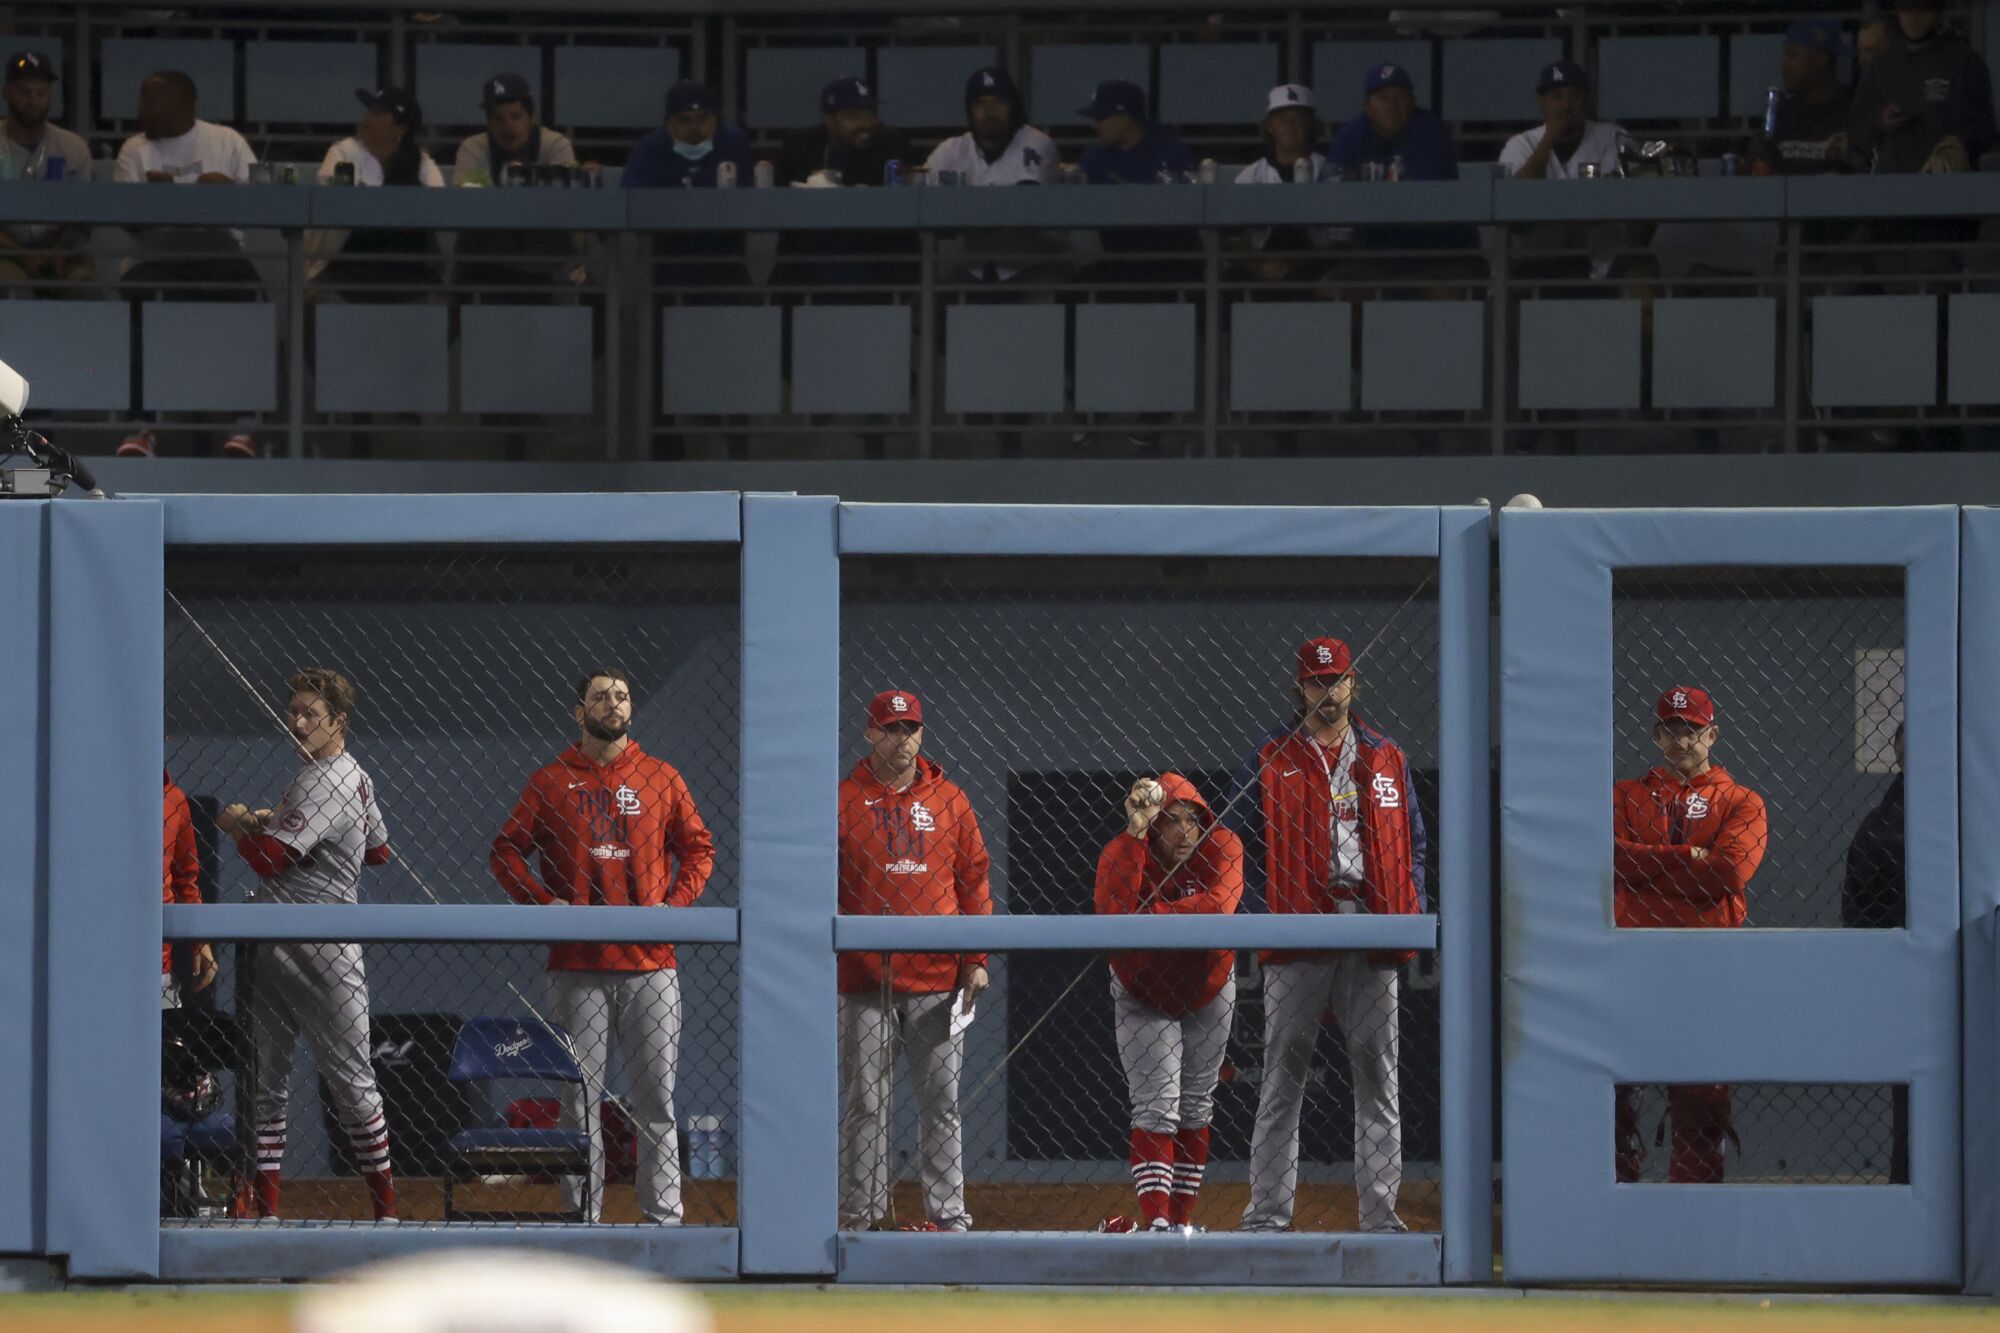 The St. Louis Cardinals bullpen watches the game during the seventh inning